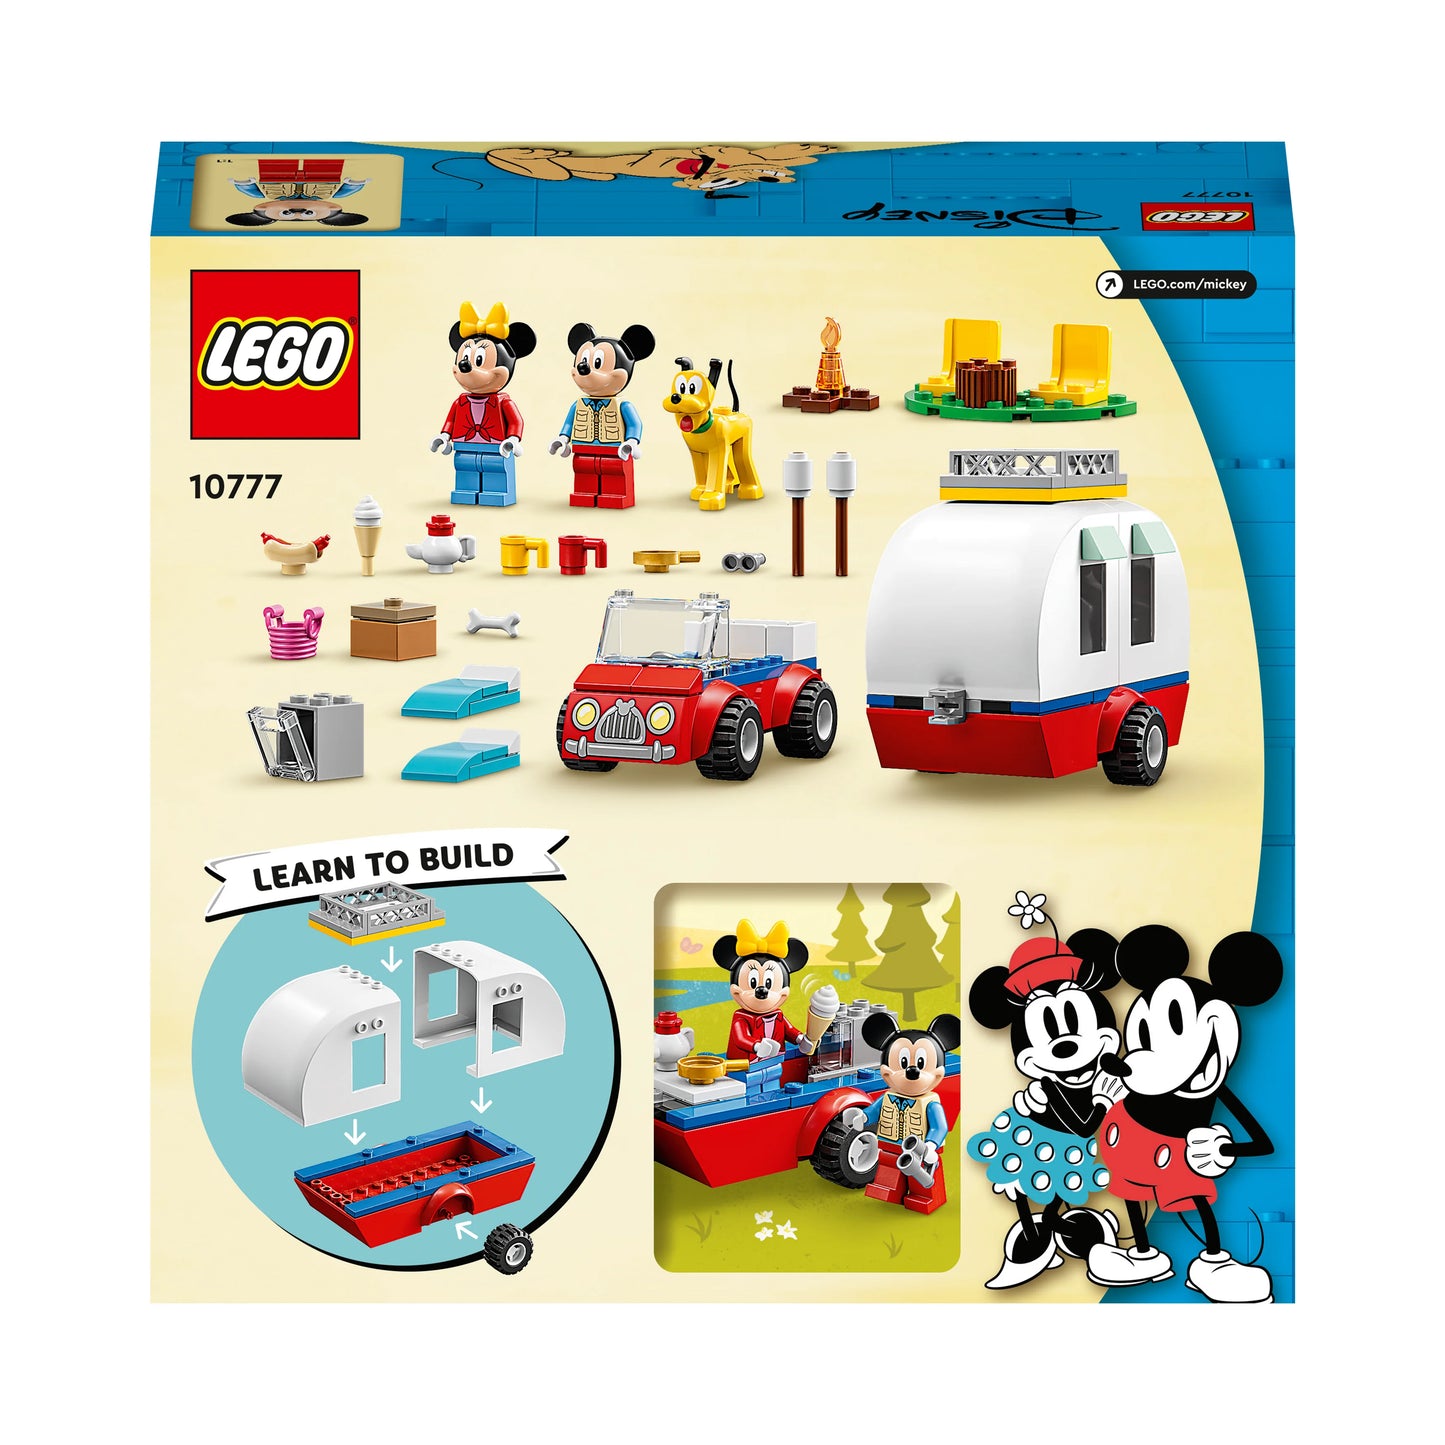 Mickey Mouse and Minnie Mouse Camping Trip - LEGO Disney